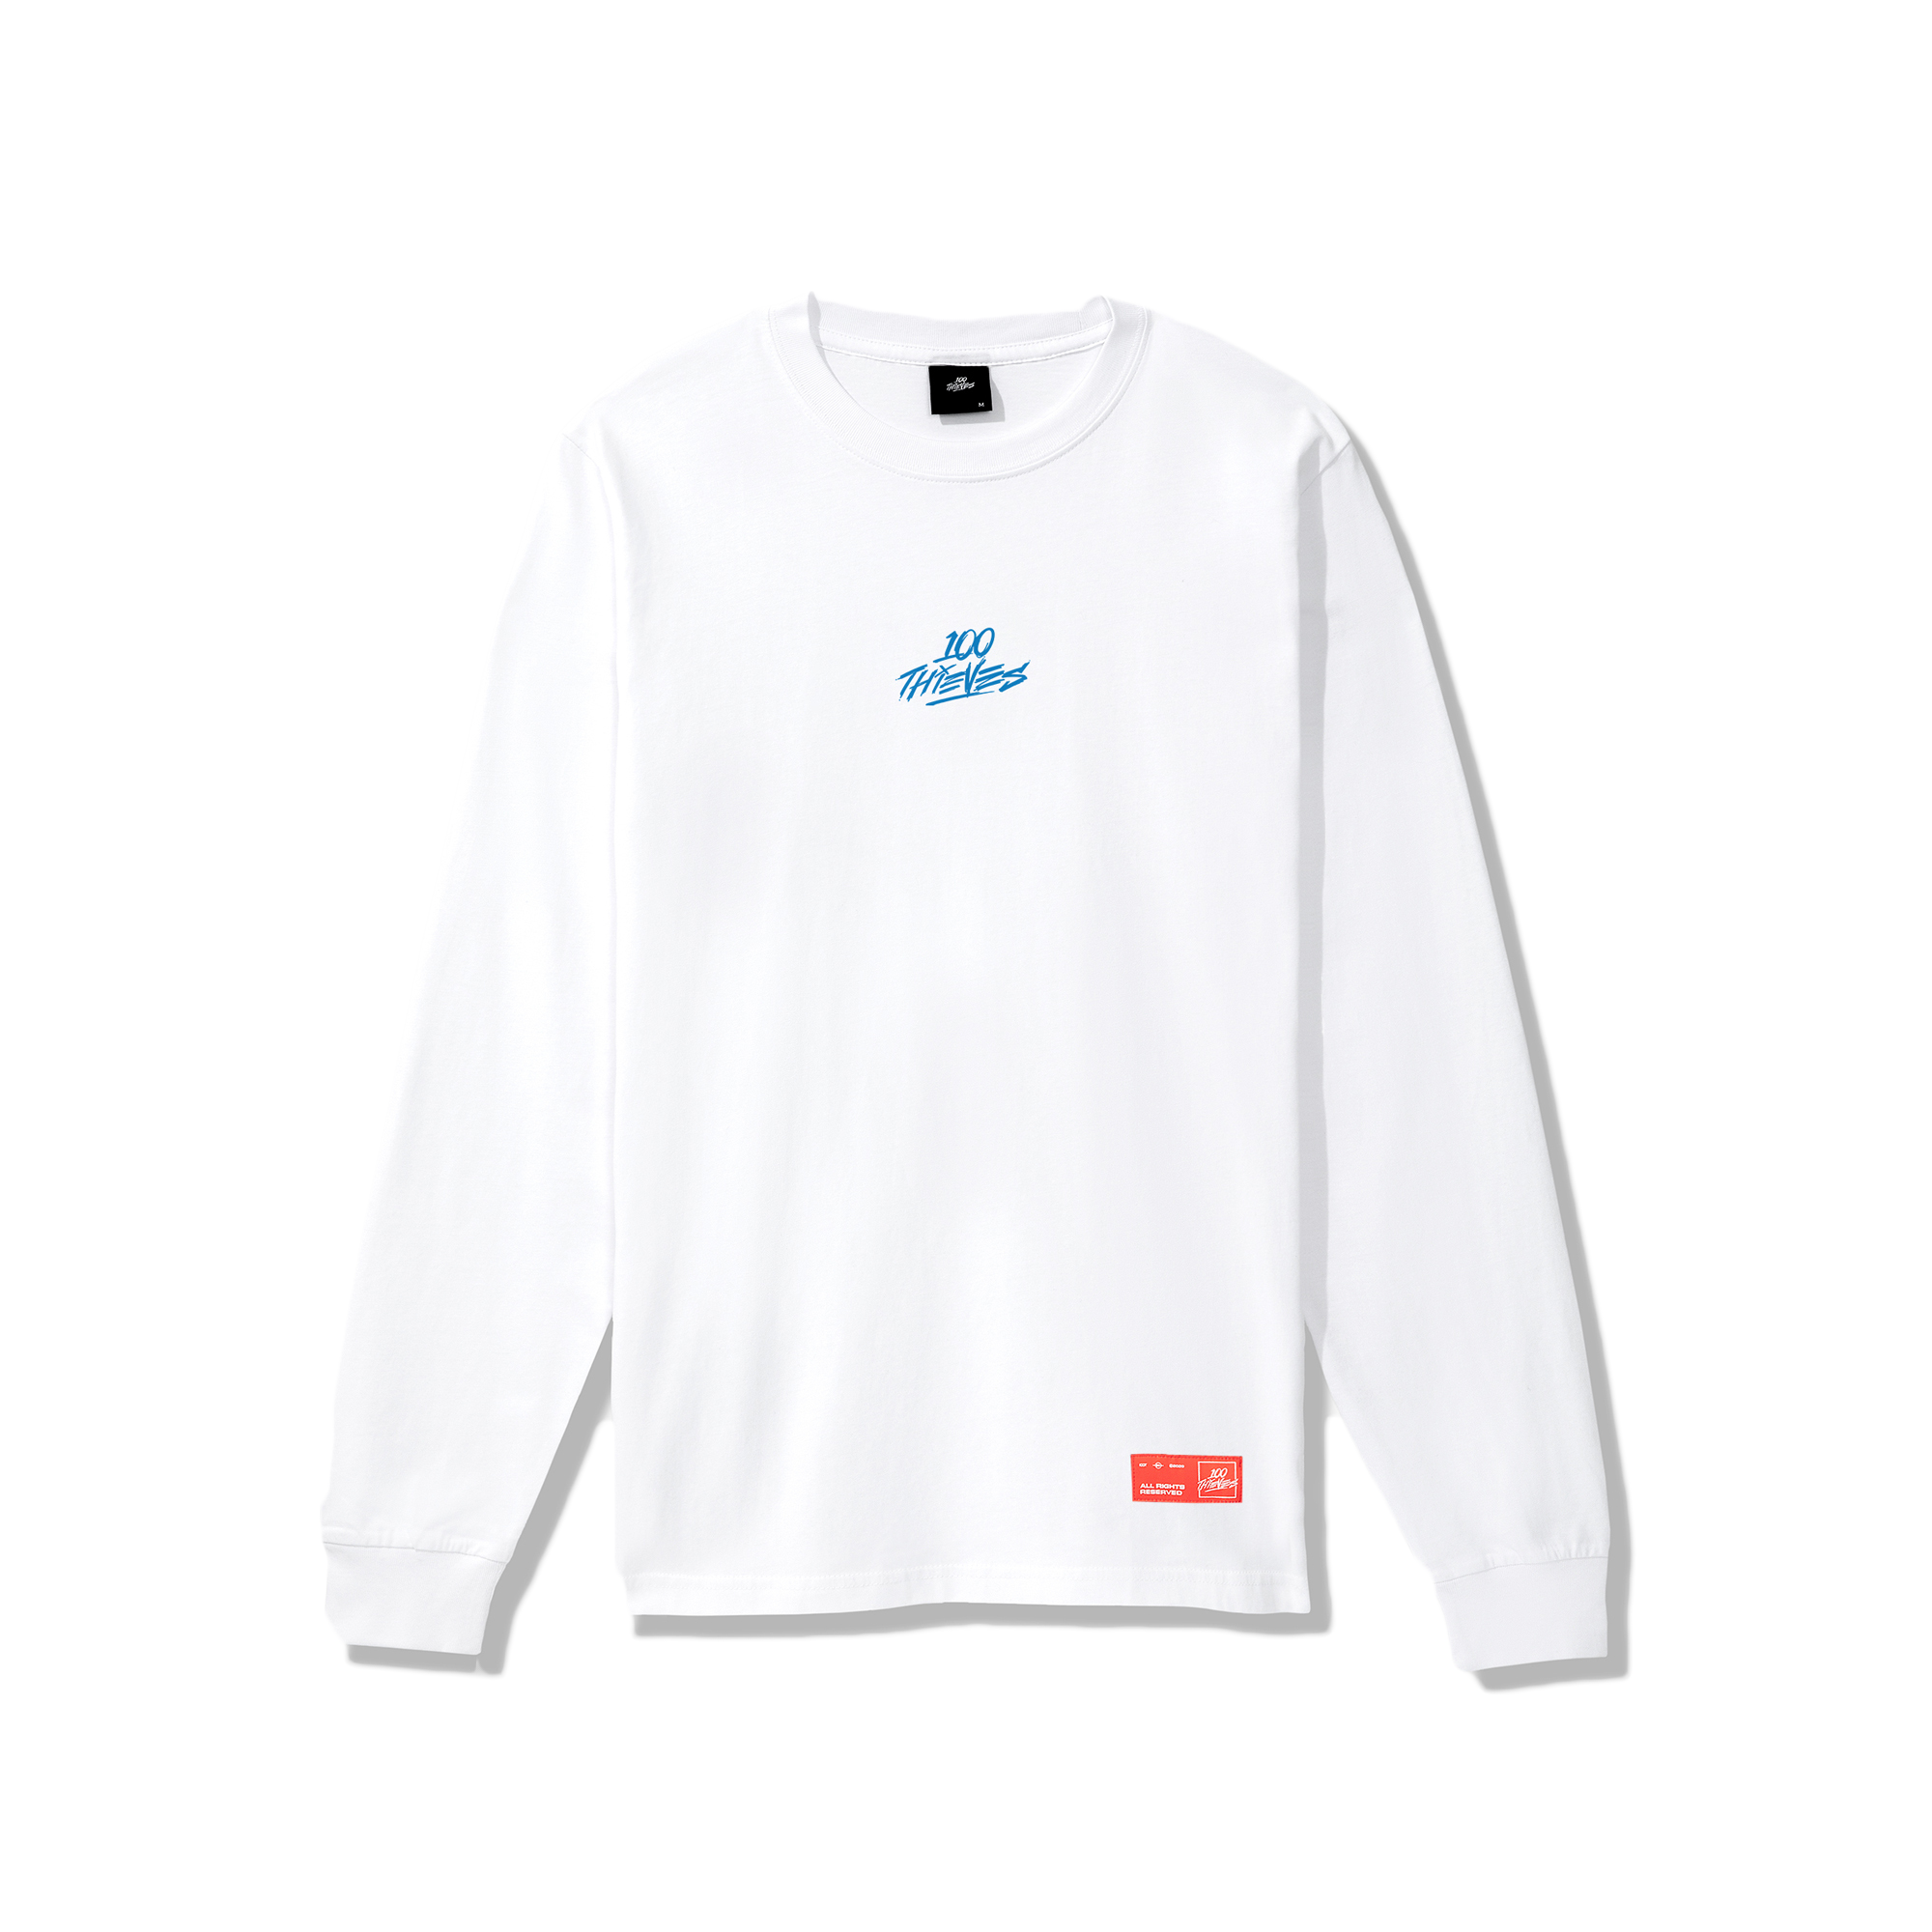 100 thieves baseball jersey for sale